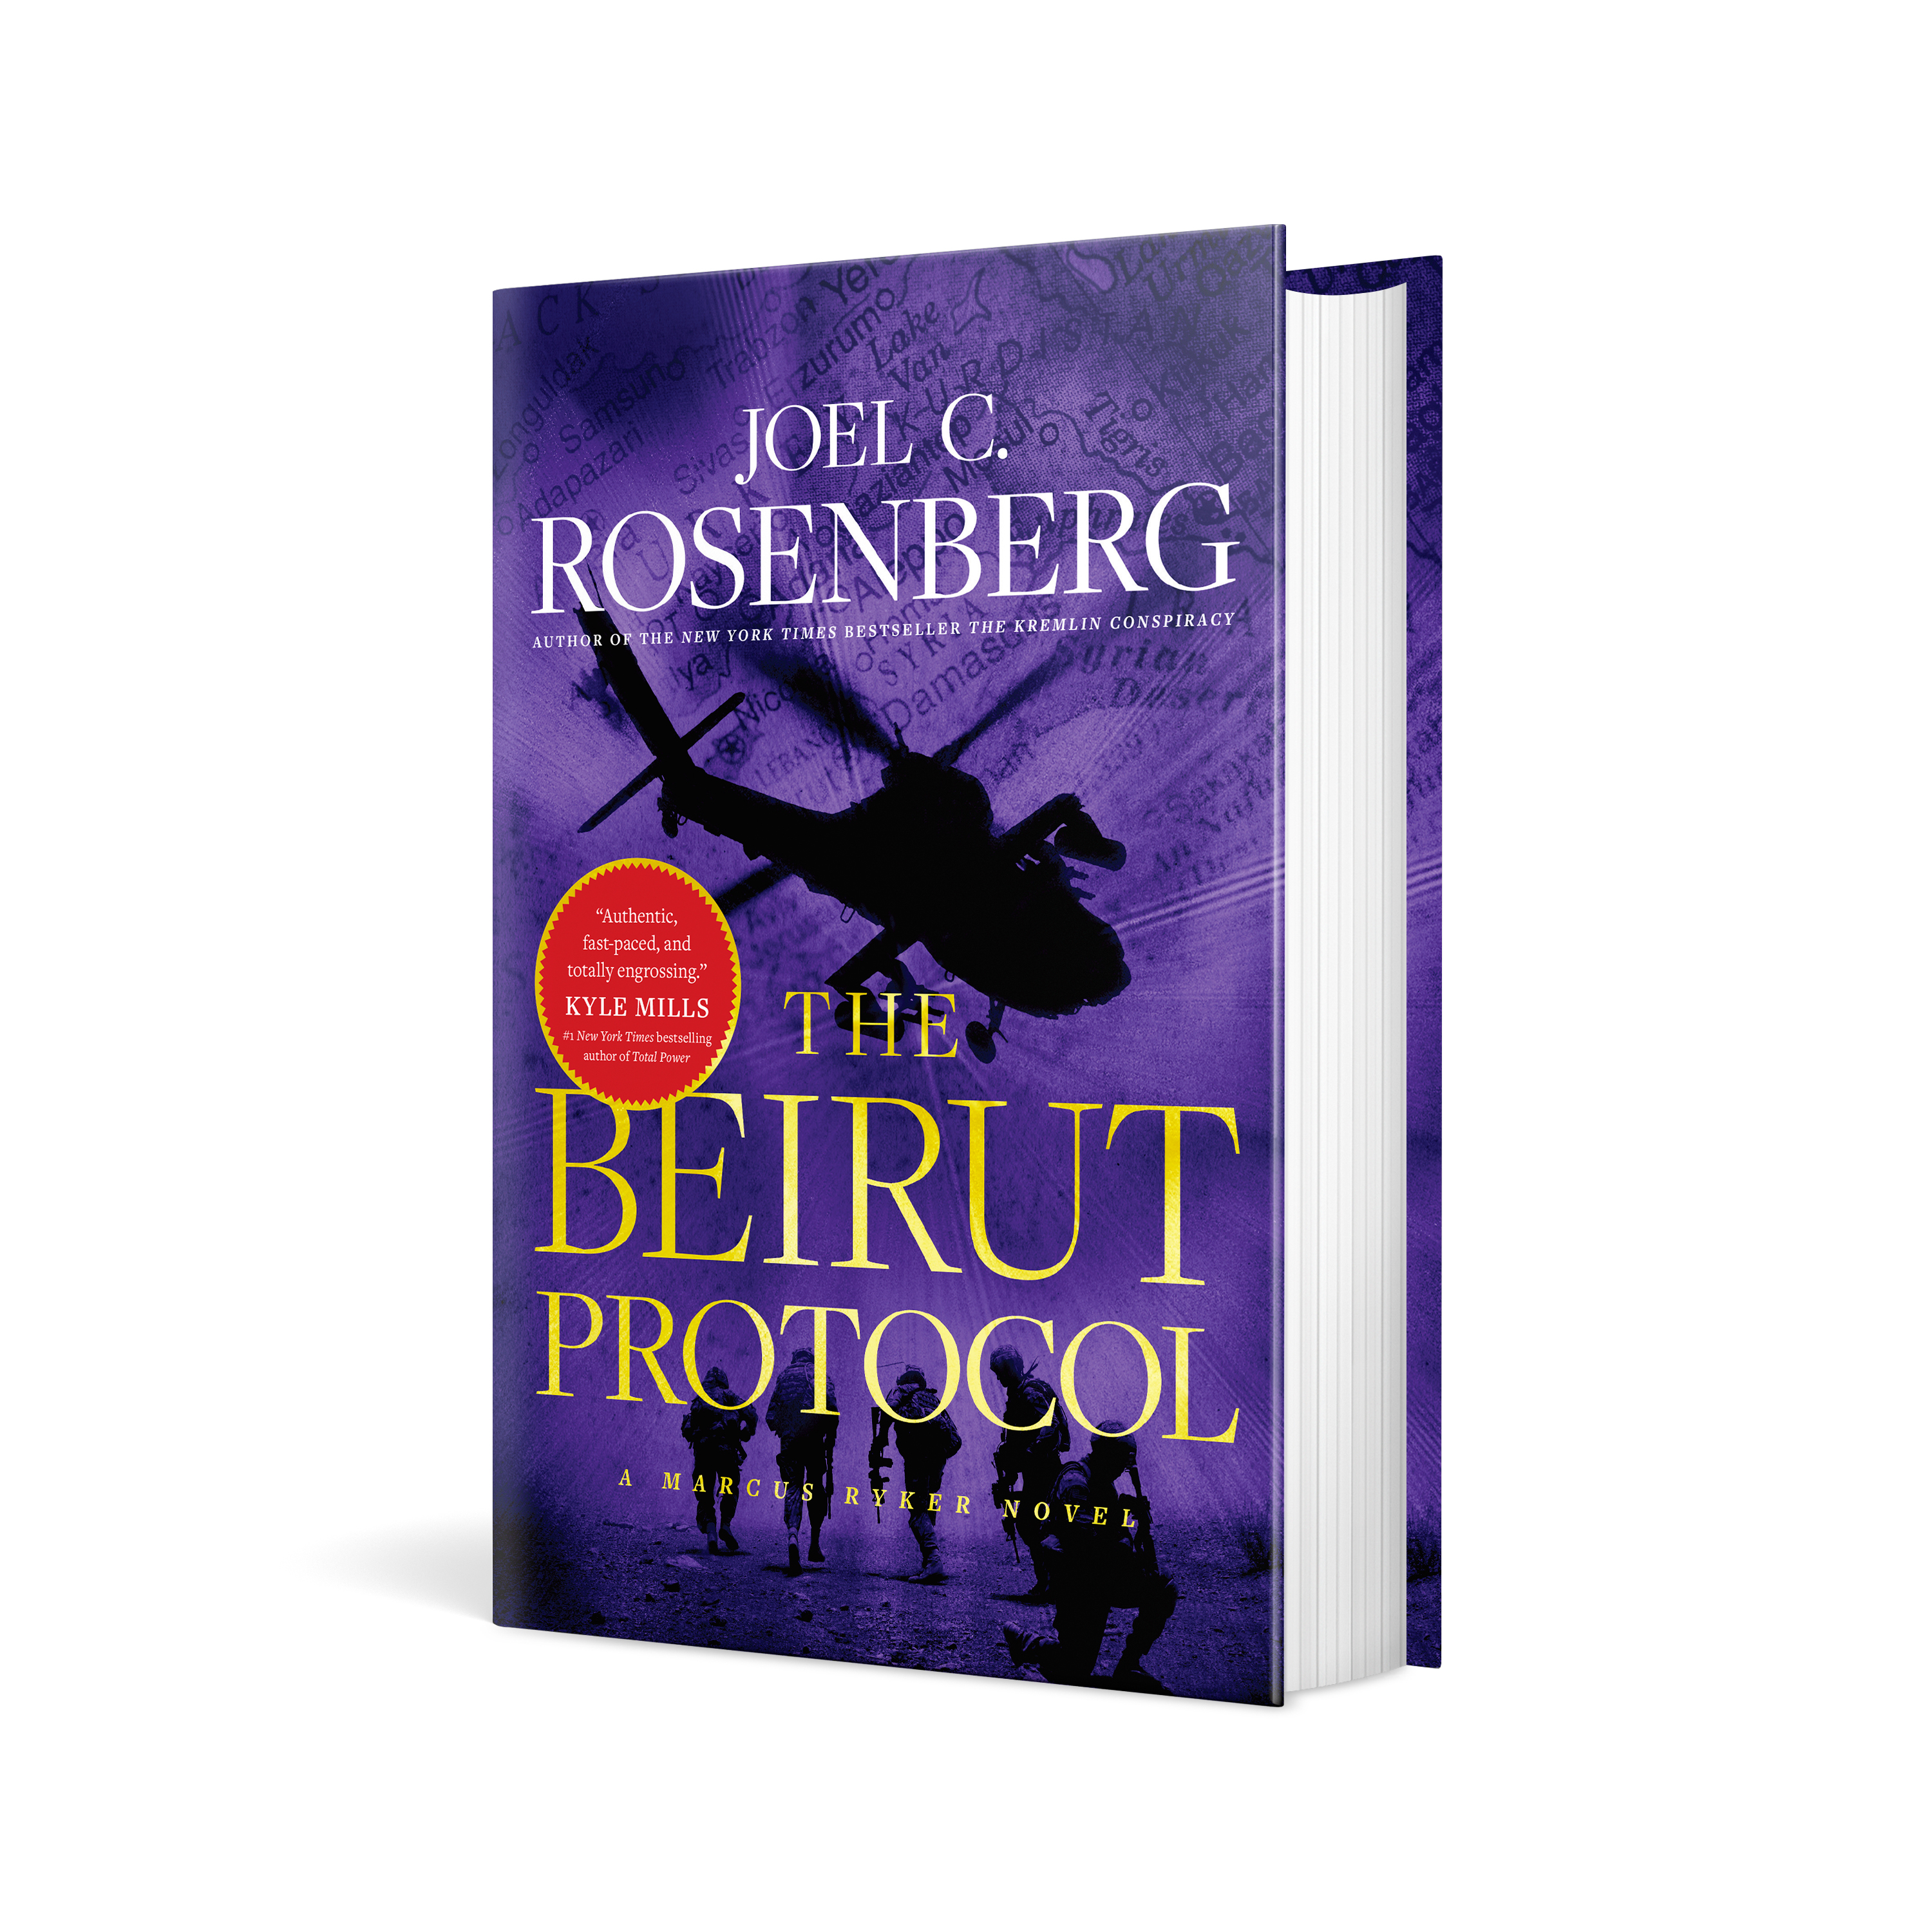 The Publishers Weekly and USA Today bestselling thriller novel The Beirut Protocol by New York Times bestselling author Joel C. Rosenberg, author of The Kremlin Conspiracy